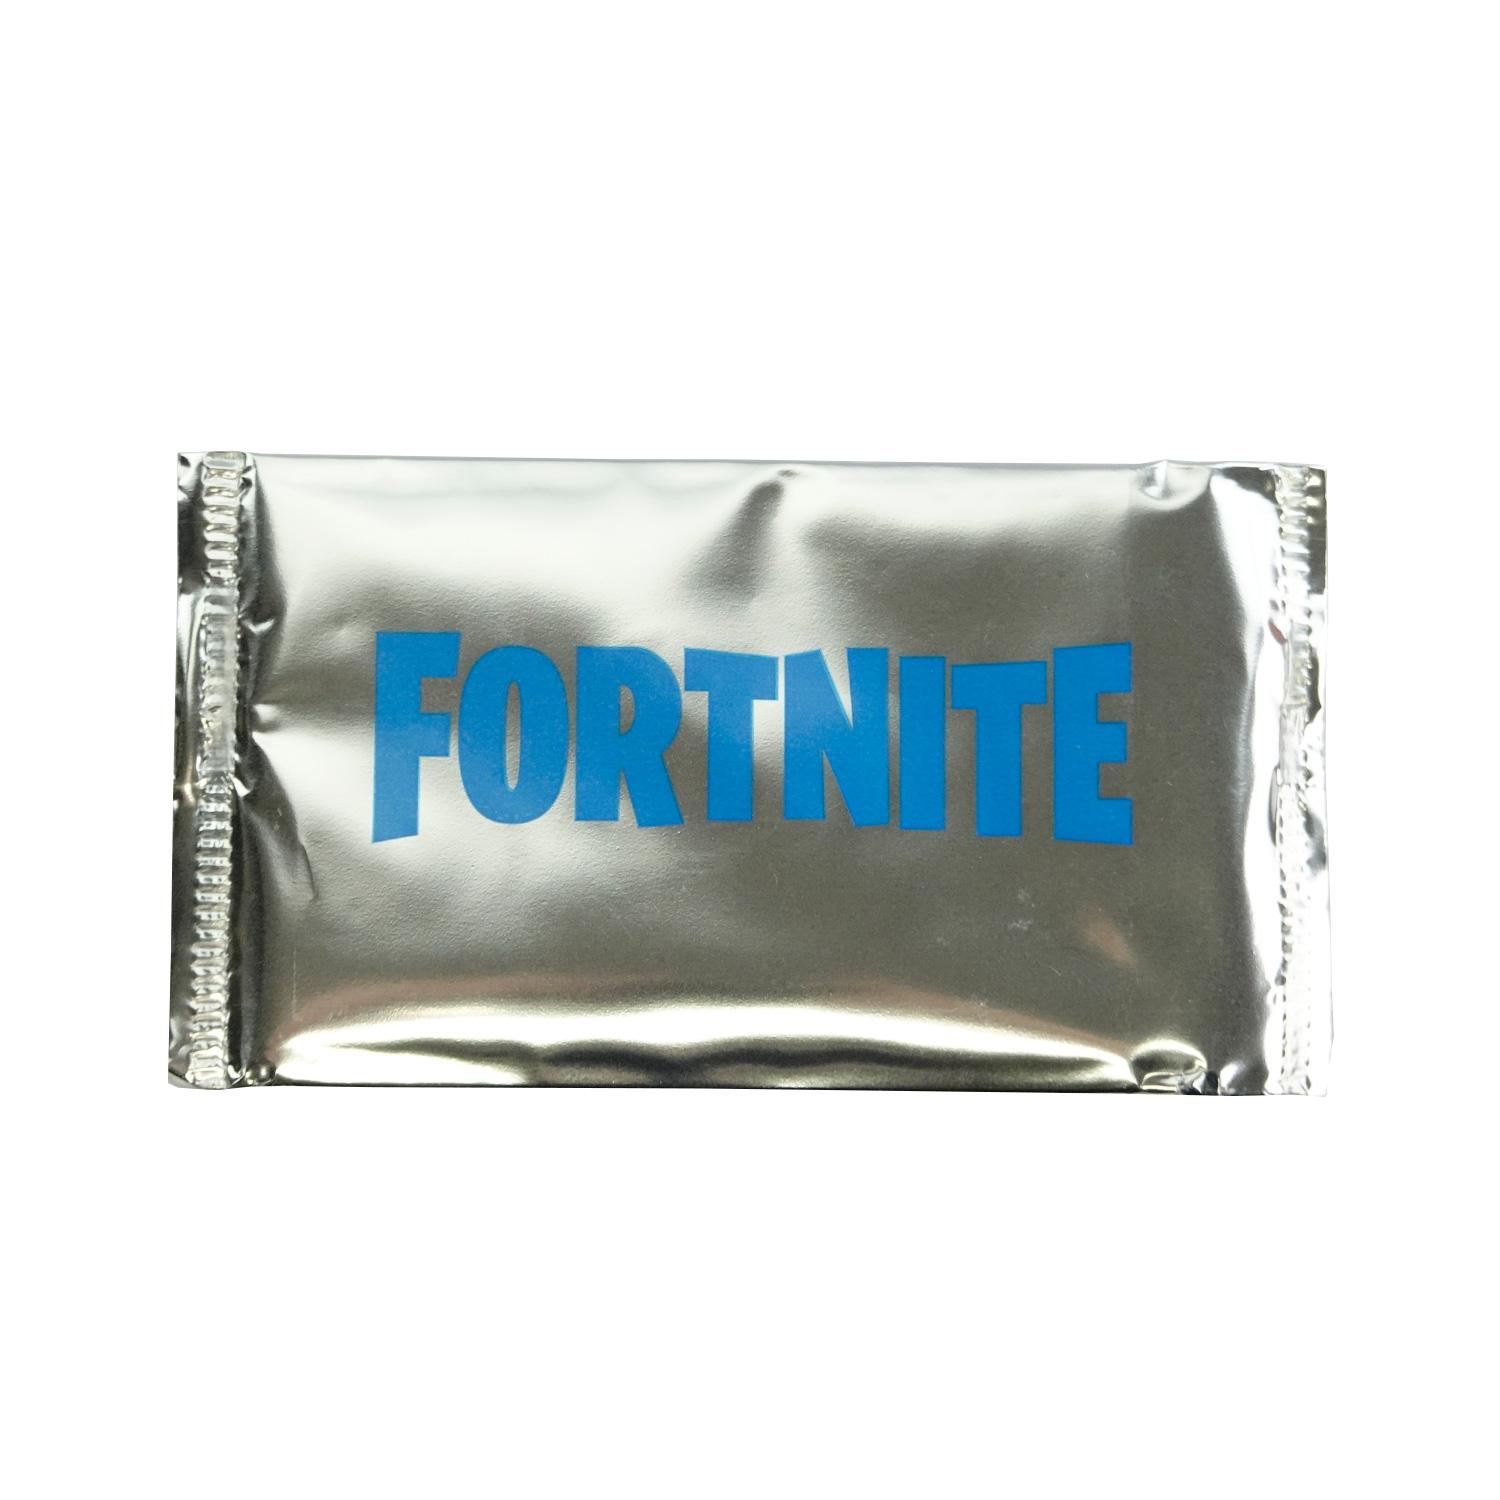 19 Fortnite Series 1 Cracked Ice Crystal Shard Pack 2 Cards Per Pack Usa Version Black Knight Da Card World